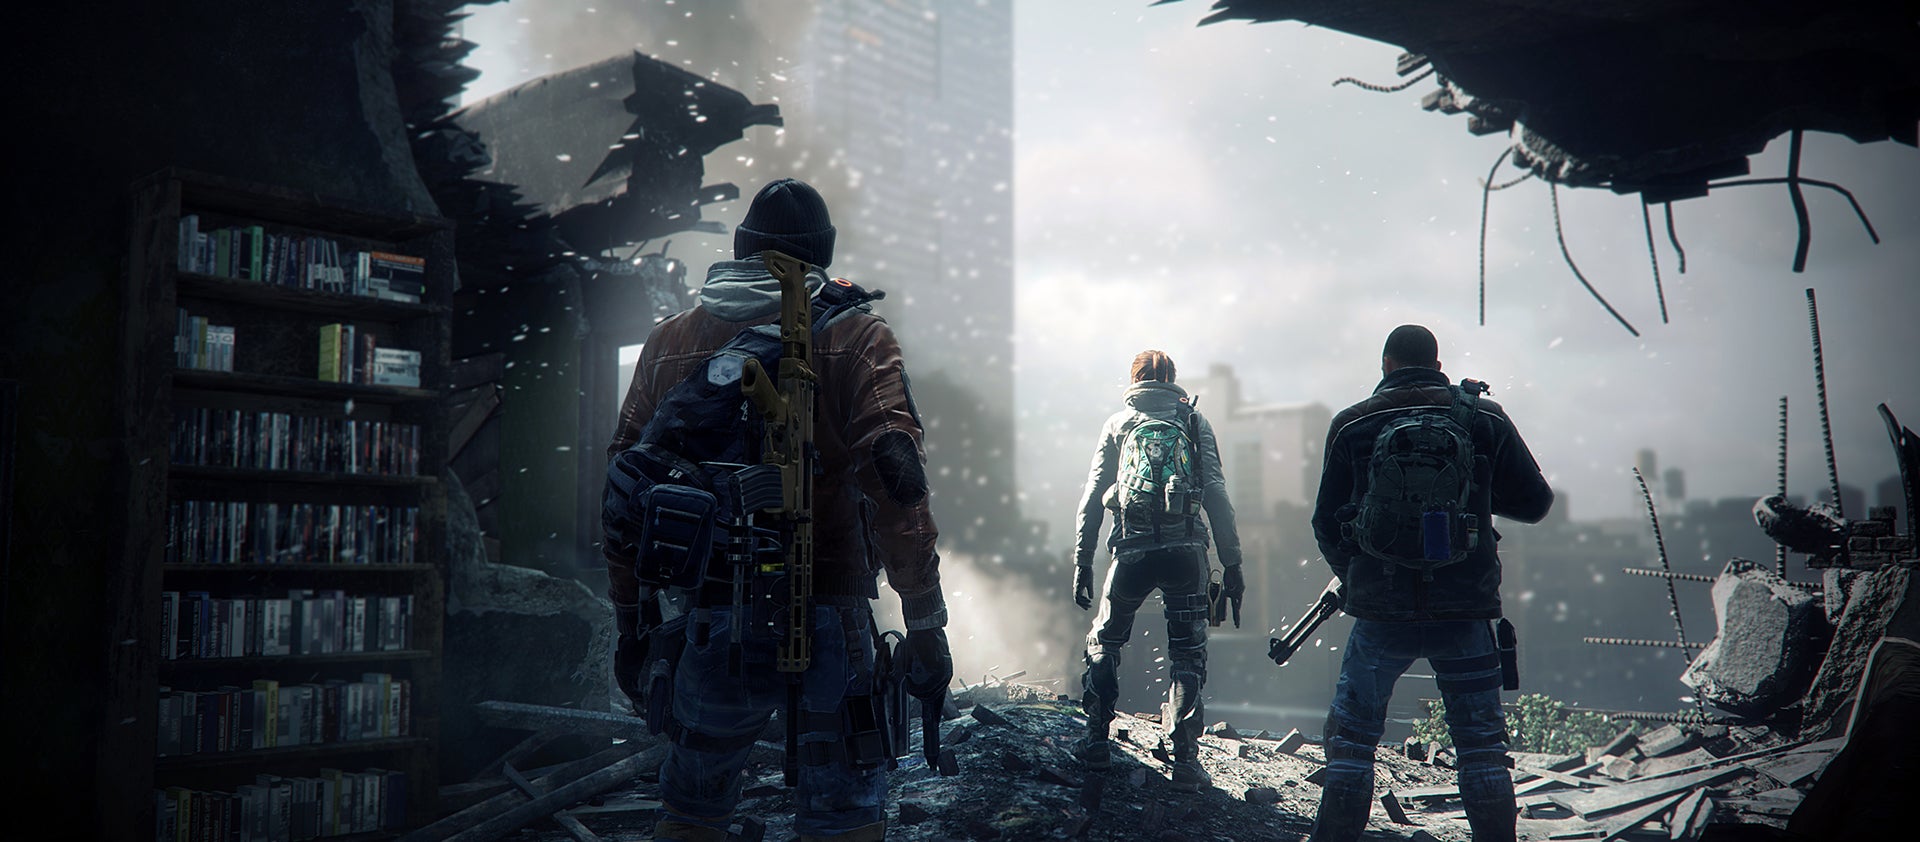 Image for The Division's dev team "investigating ways" to make PTS available on consoles